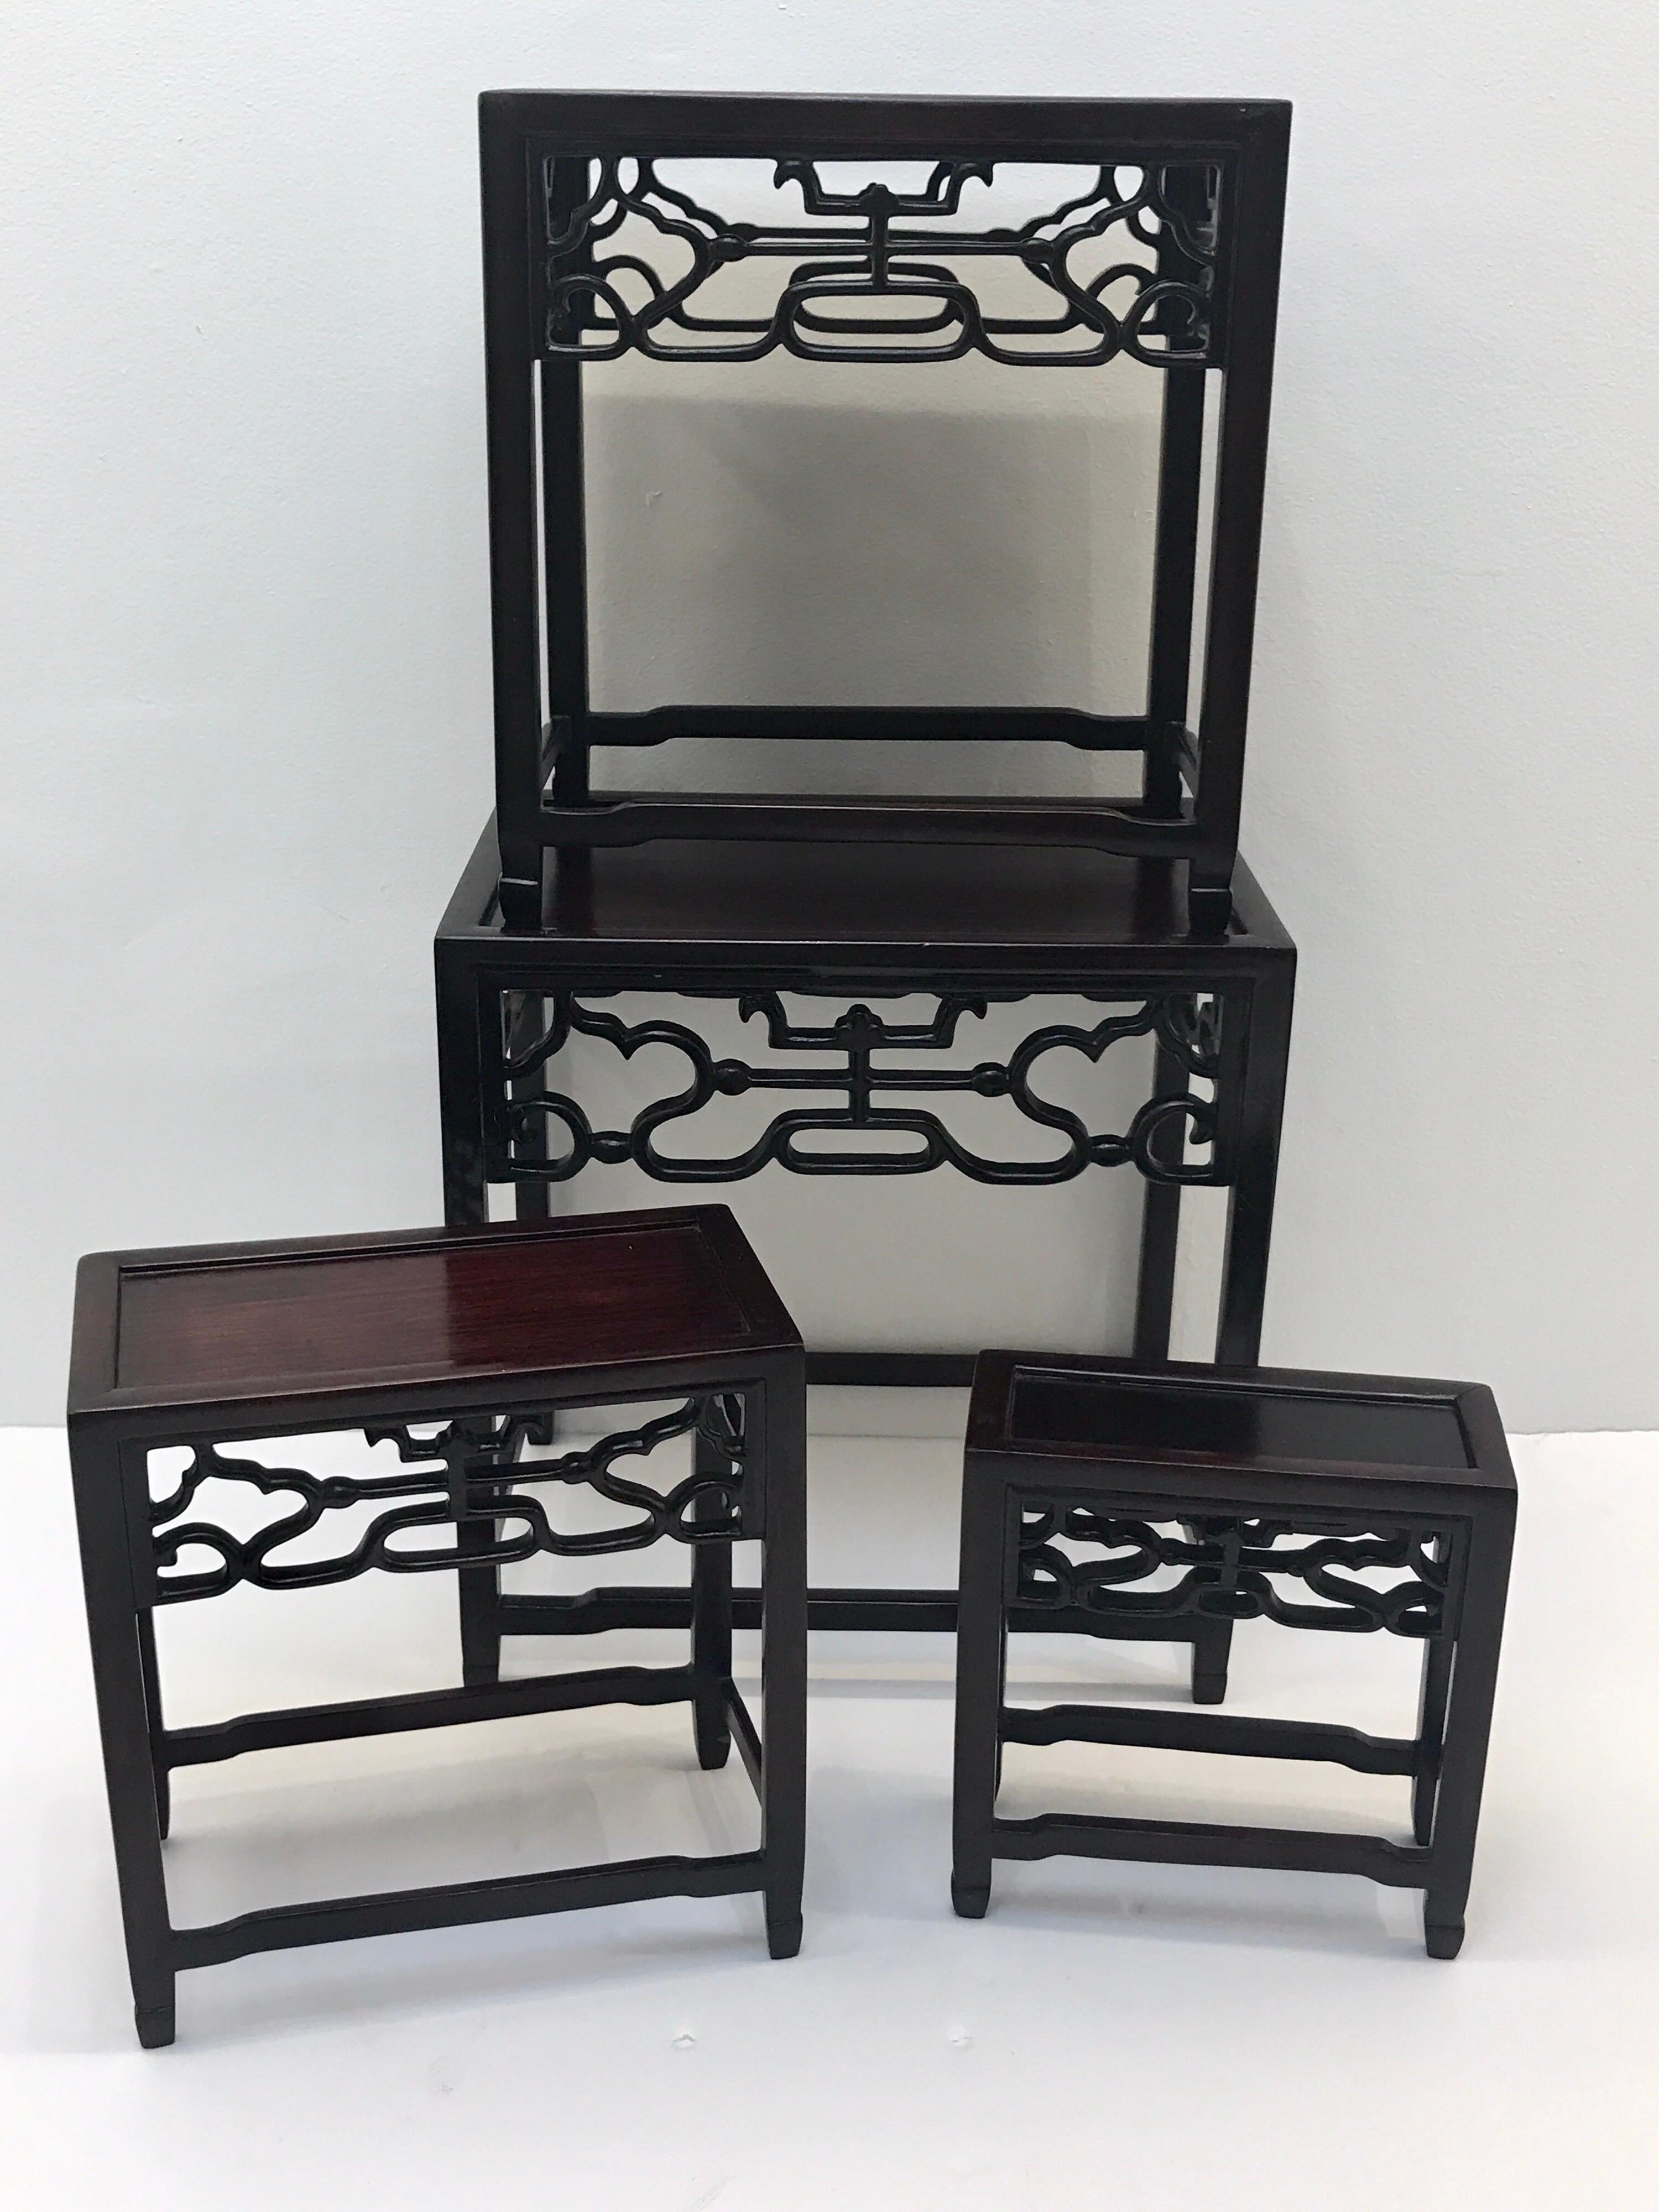 Four Chinese graduating carved hardwood stands, each one of rectangular form with intricate carved friezes, the stands nest for transport.
Measures: 2.5